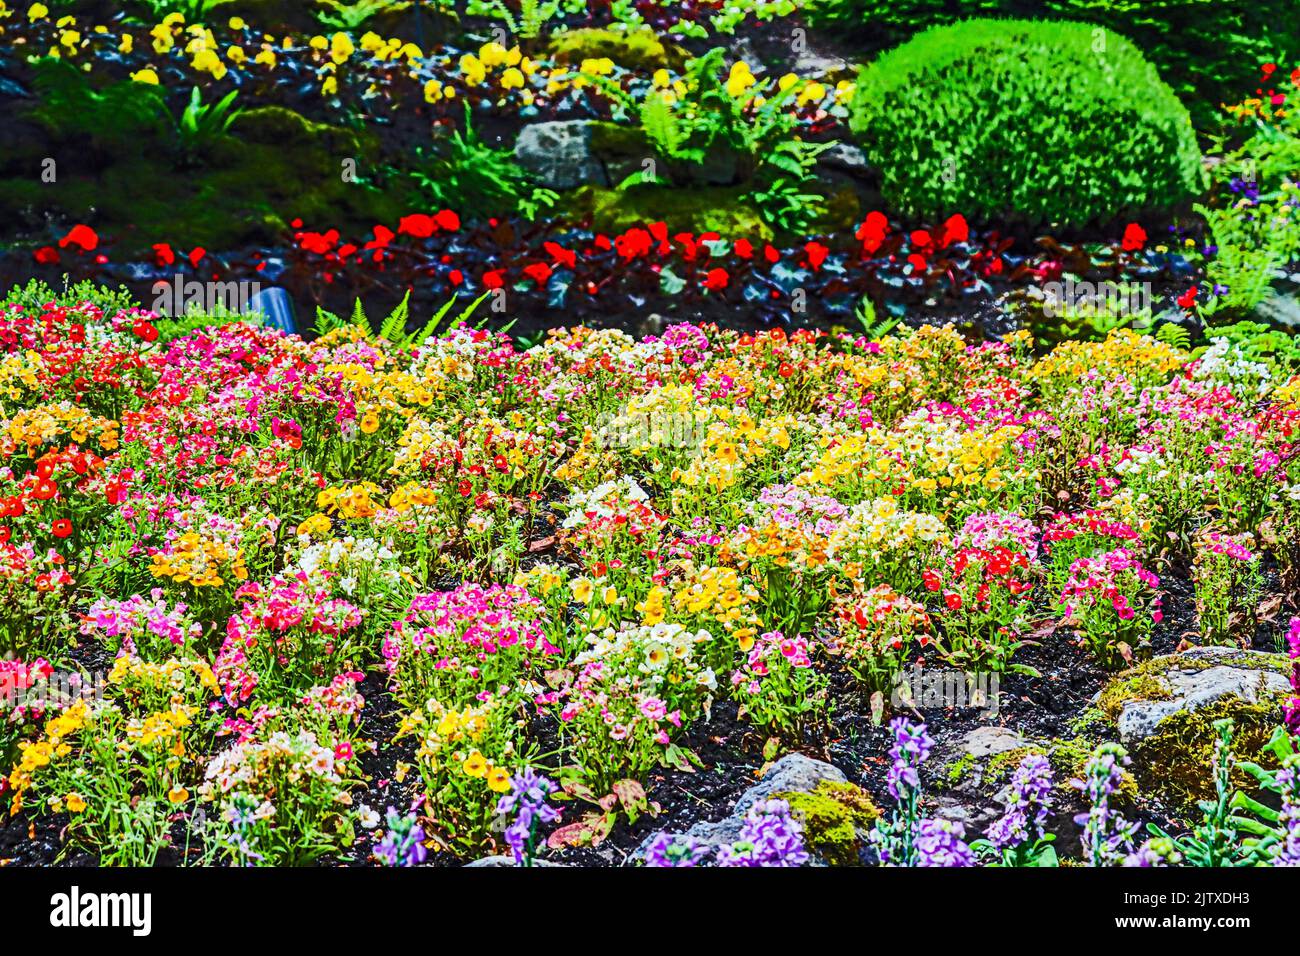 A colorful bed of petunias (Solanaceae, subfamily Petunioideae) at Butchart Gardens near Victoria, Vancouver Island, British Columbia, Canada. Stock Photo